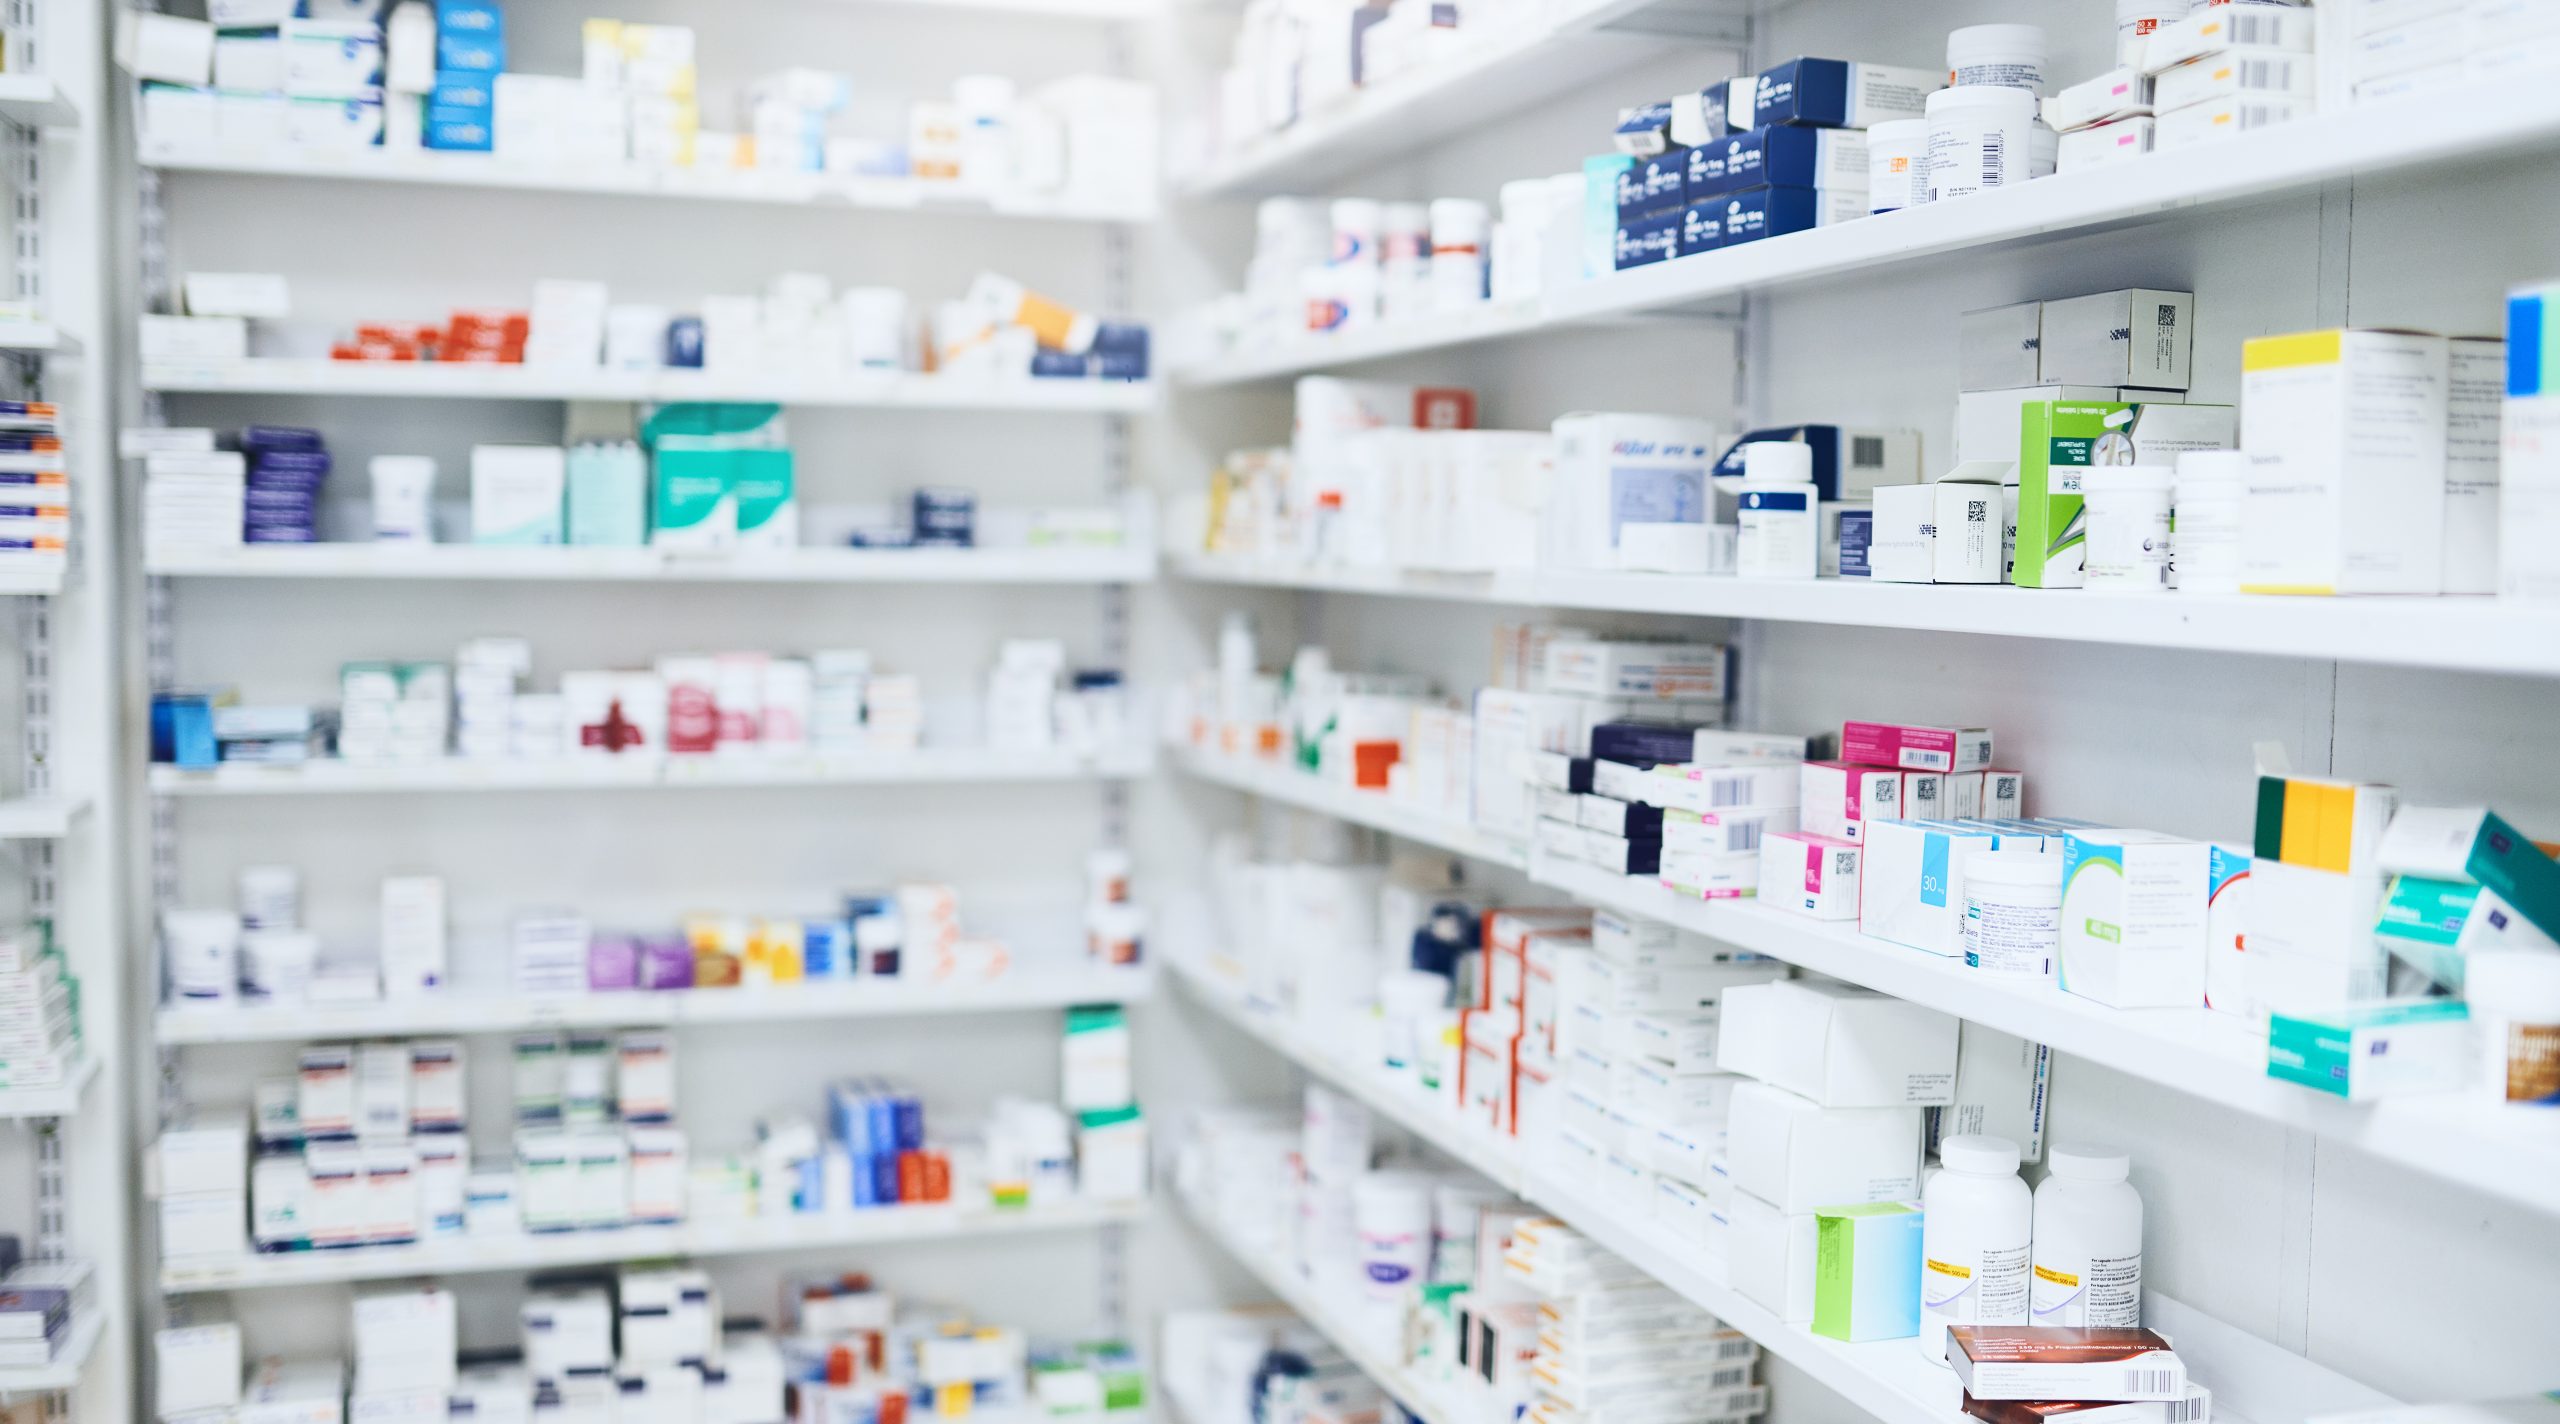 KMC directs pharmacies to function within criteria